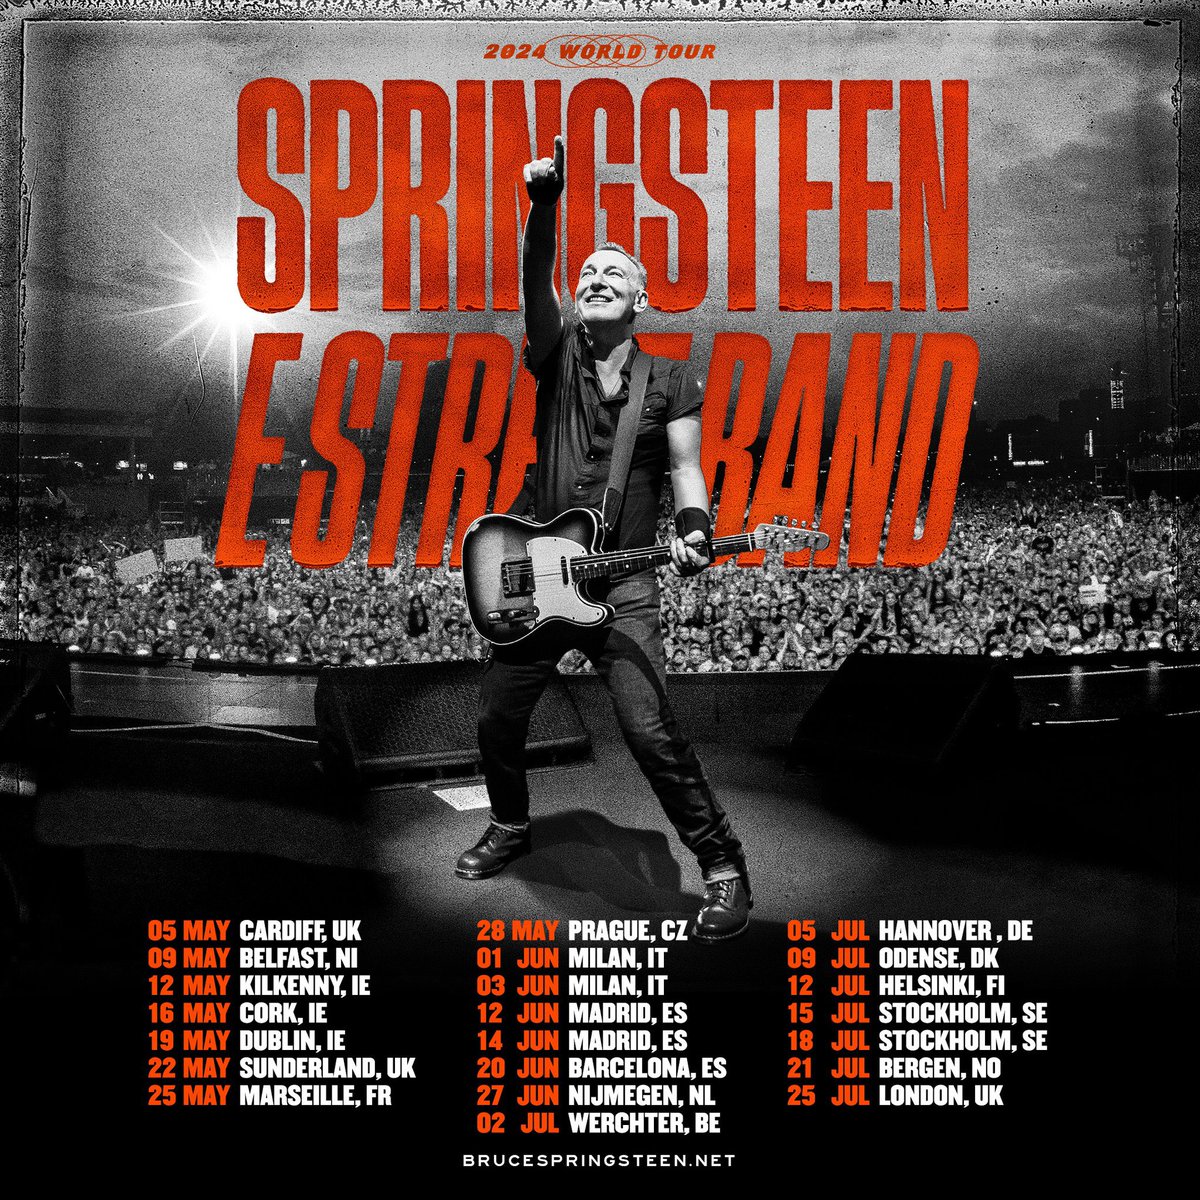 After last summer’s trip to Villa Park, I never thought I’d ever get to see “The Boss” again. Well Cardiff, today’s the day! #SpringsteenTour2024 🎵🇺🇸